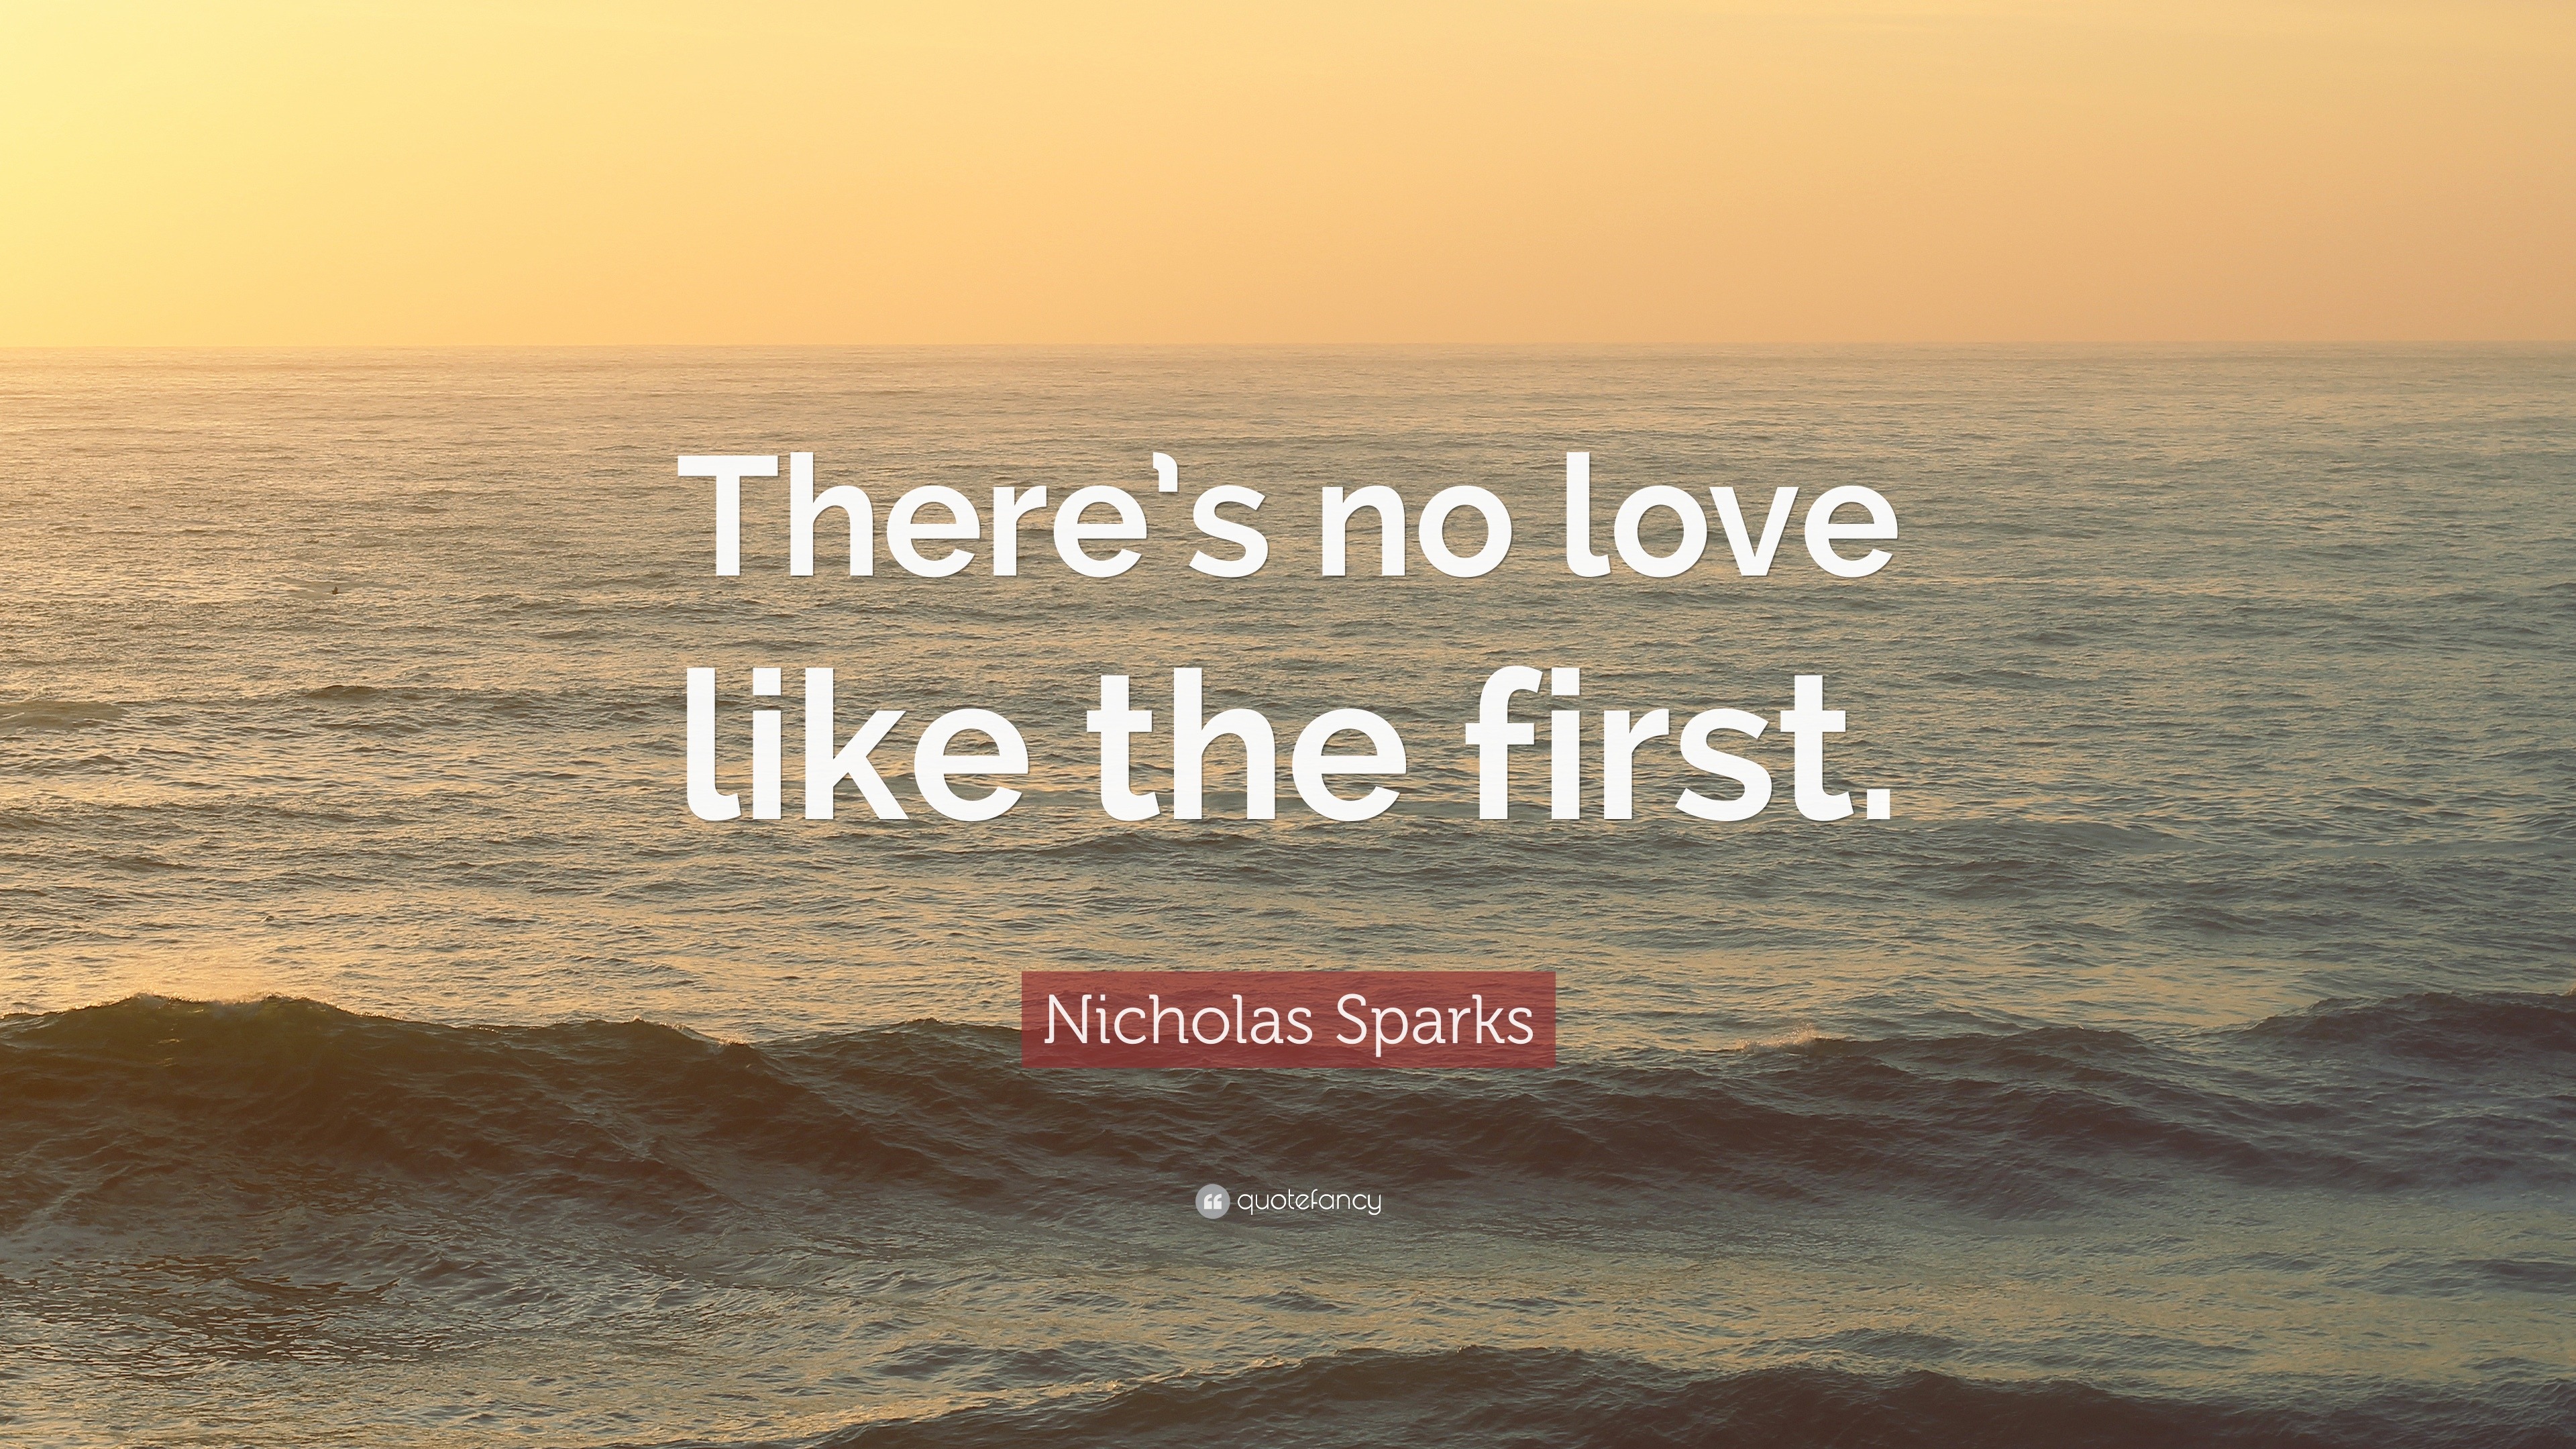 Nicholas Sparks Quote “There s no love like the first ”